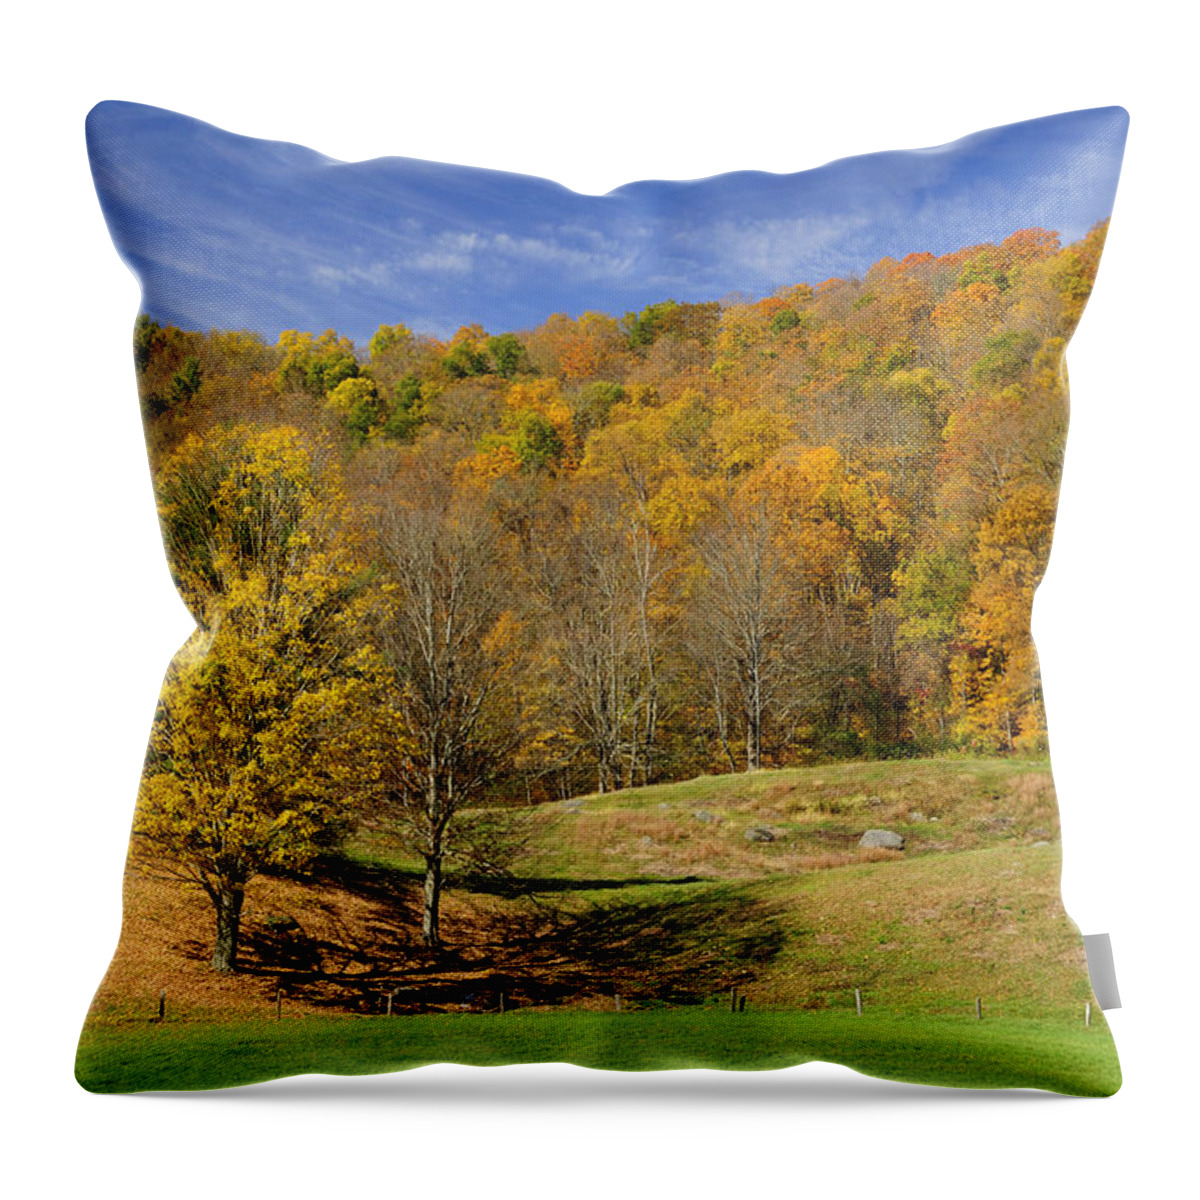 Autumn Throw Pillow featuring the photograph Rolling Hills by Luke Moore